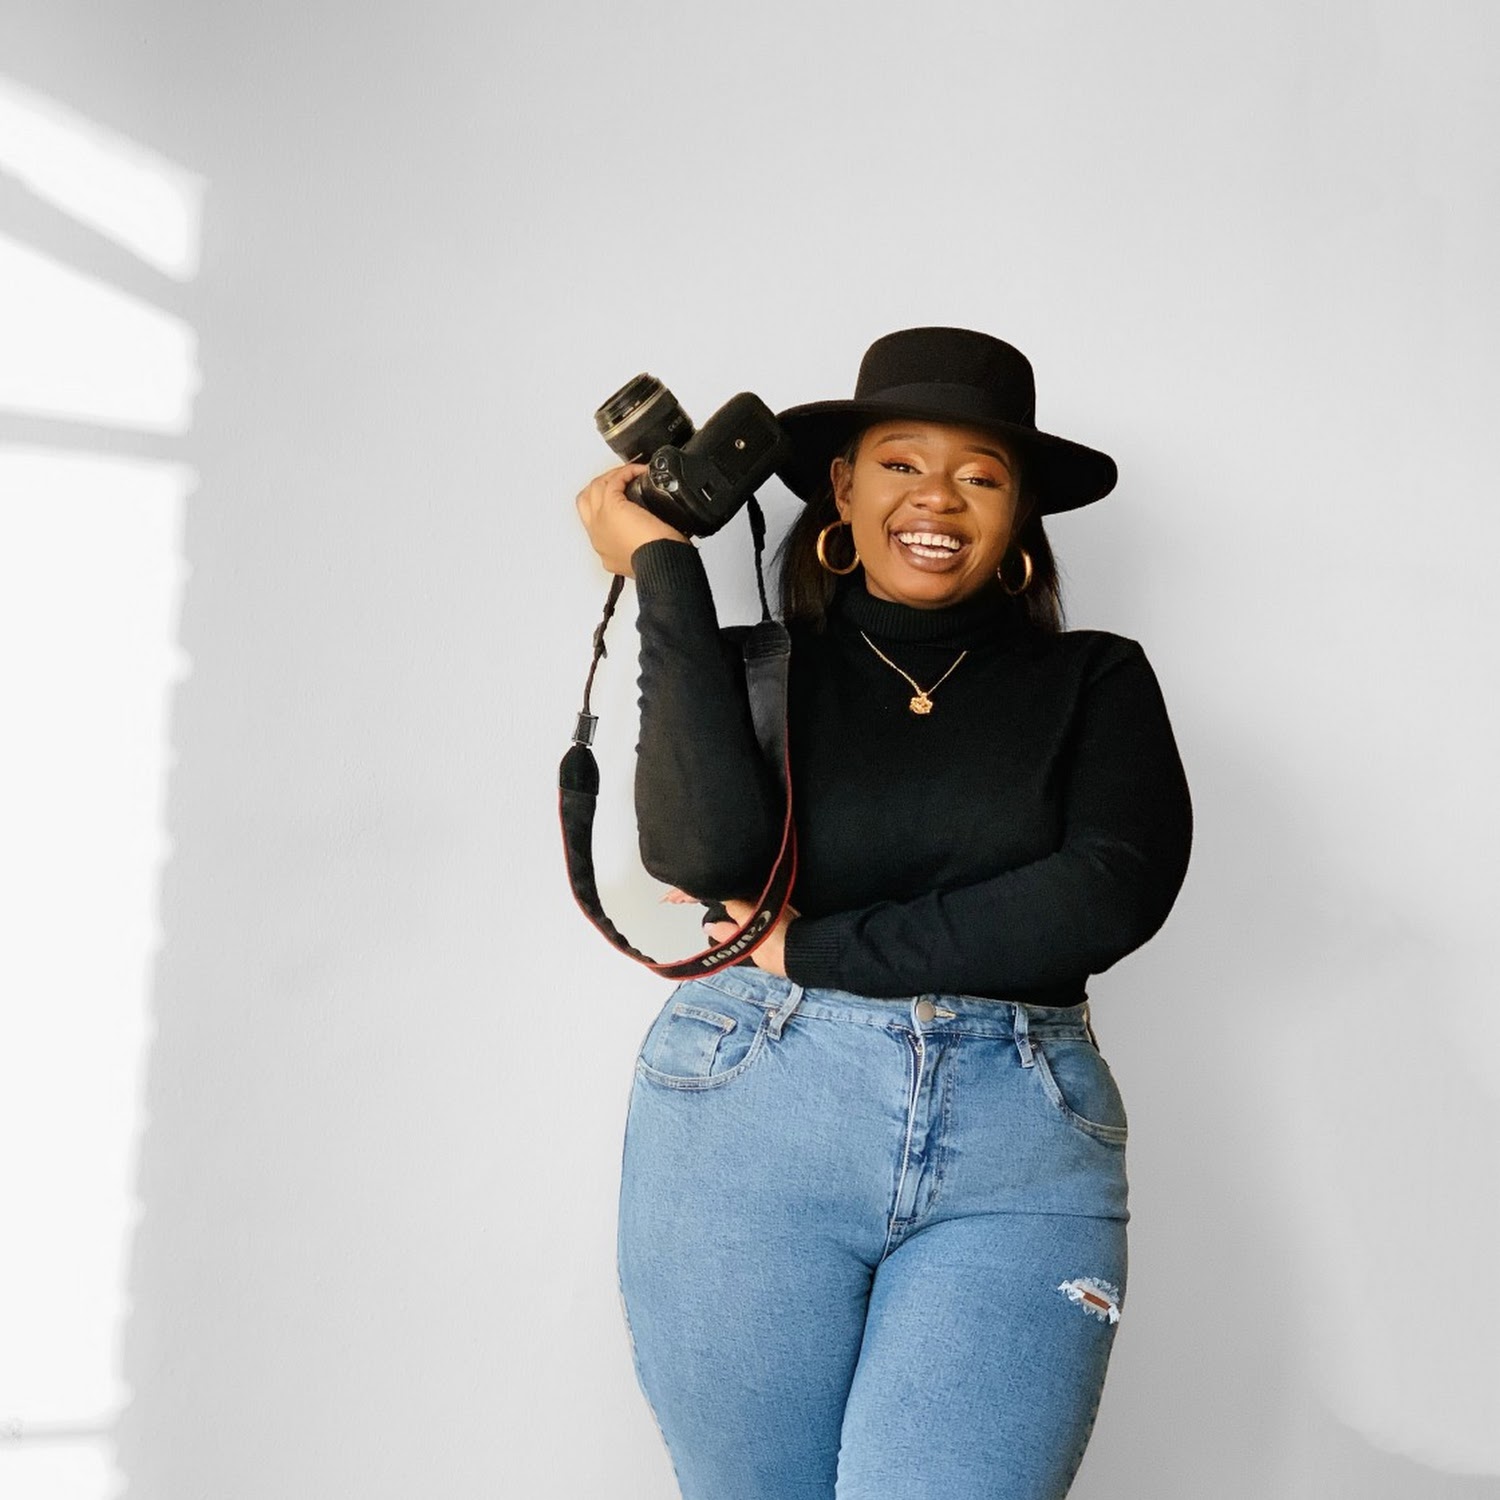 Thickleeyonce on her favourite local designers, makeup brand